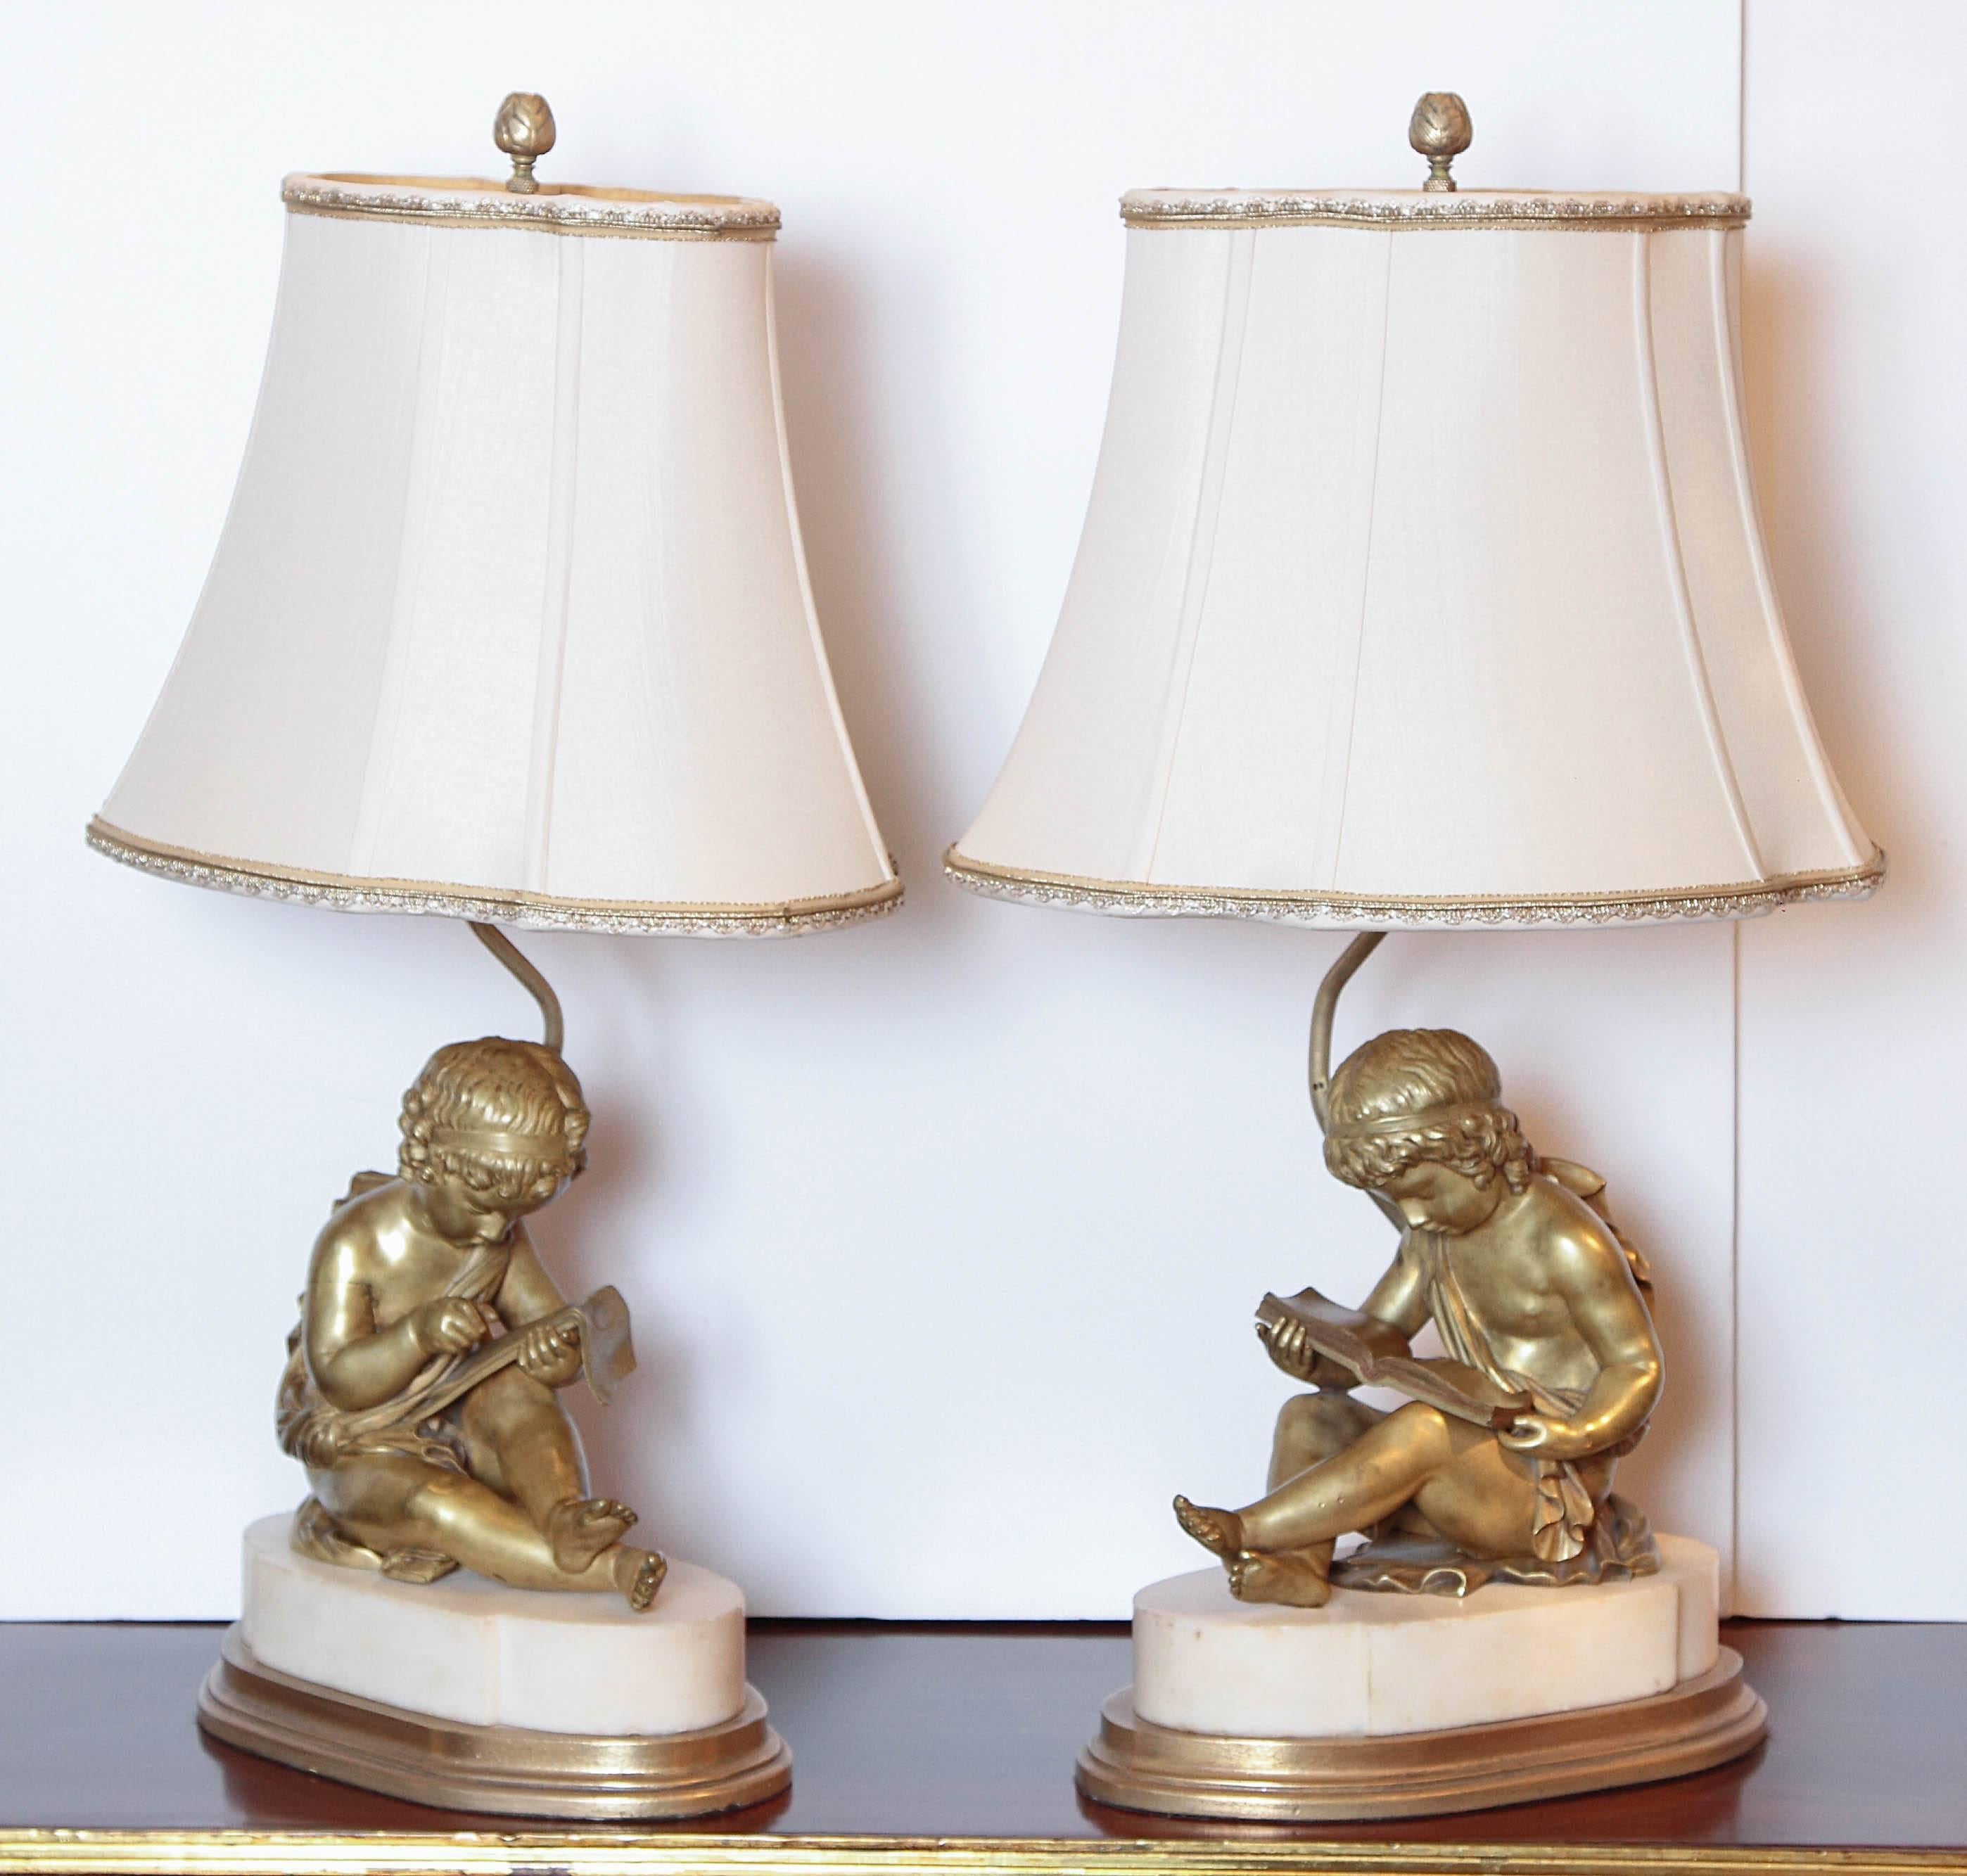 Pair of finely cast 19th century French gilt bronze children reading on white marble bases. Made into lamps custom wired and shaded.